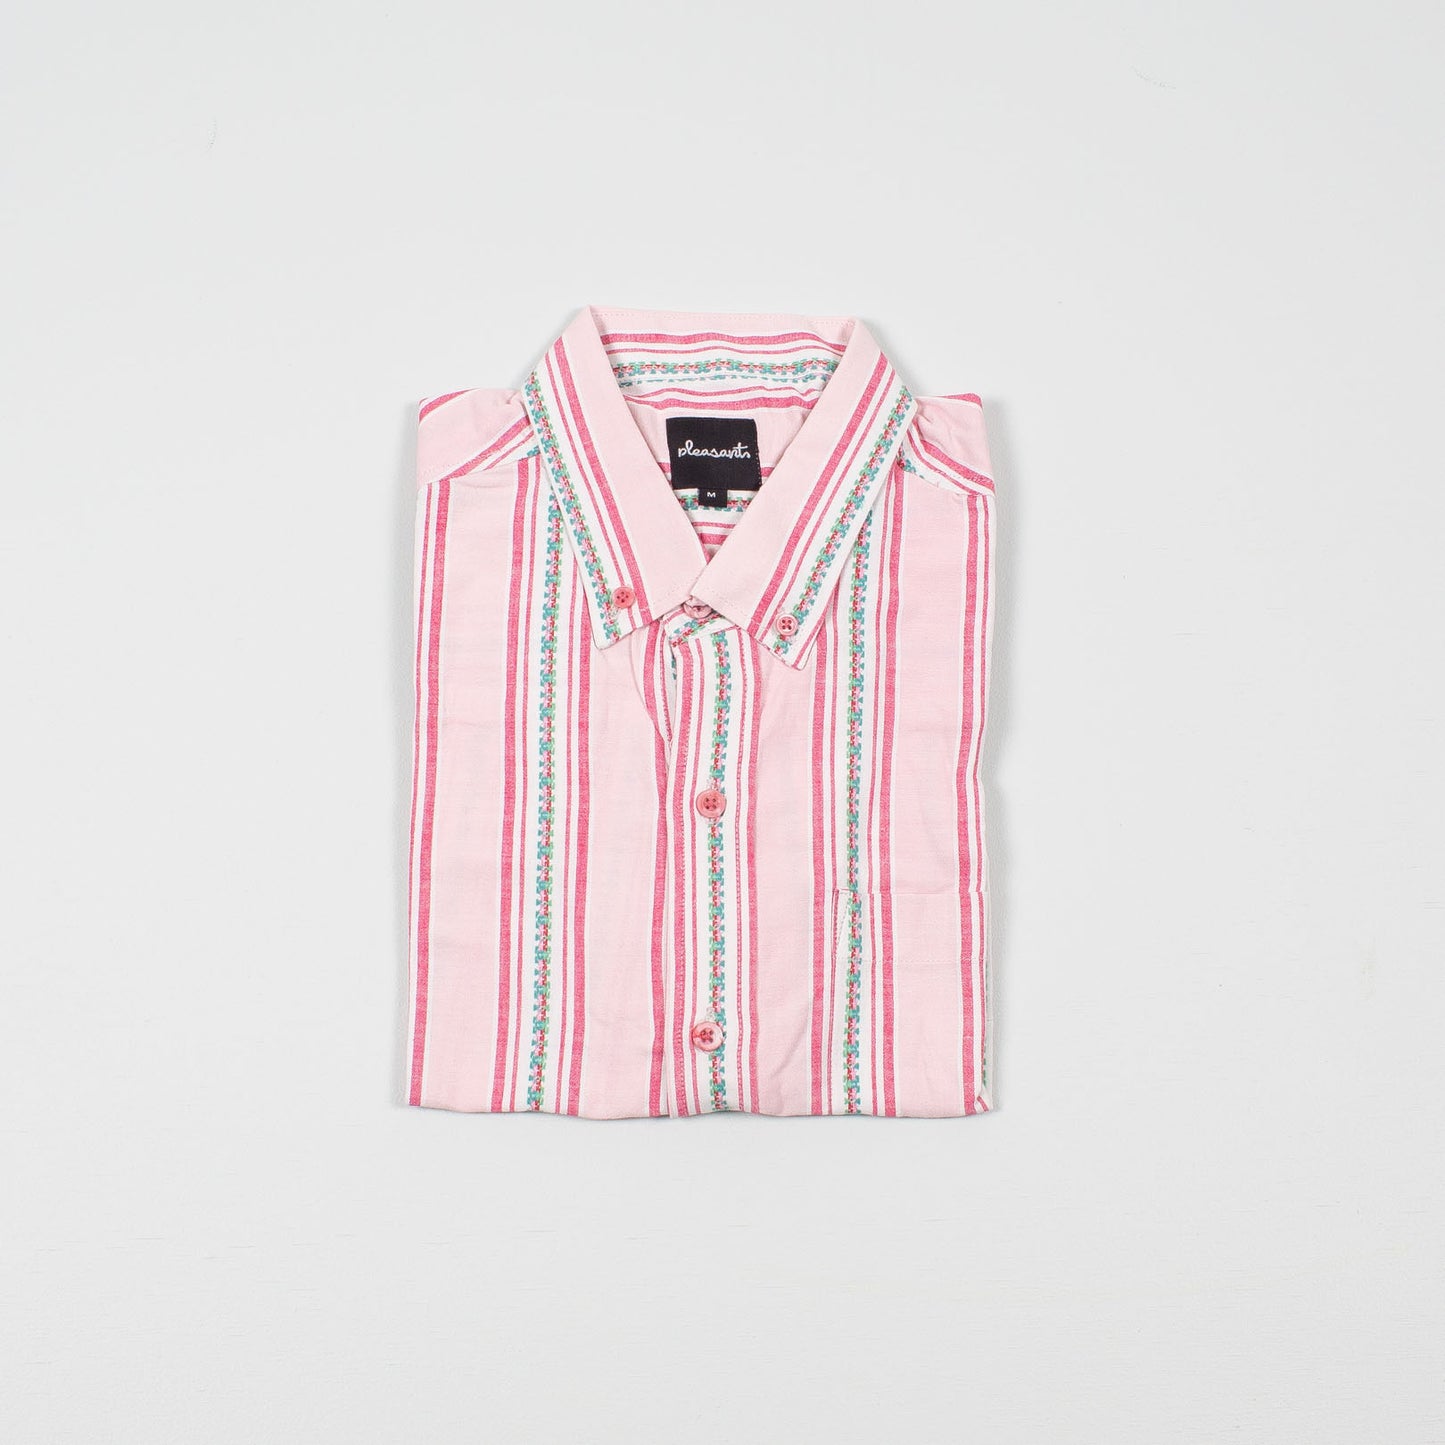 Striped pink upcycled shirt